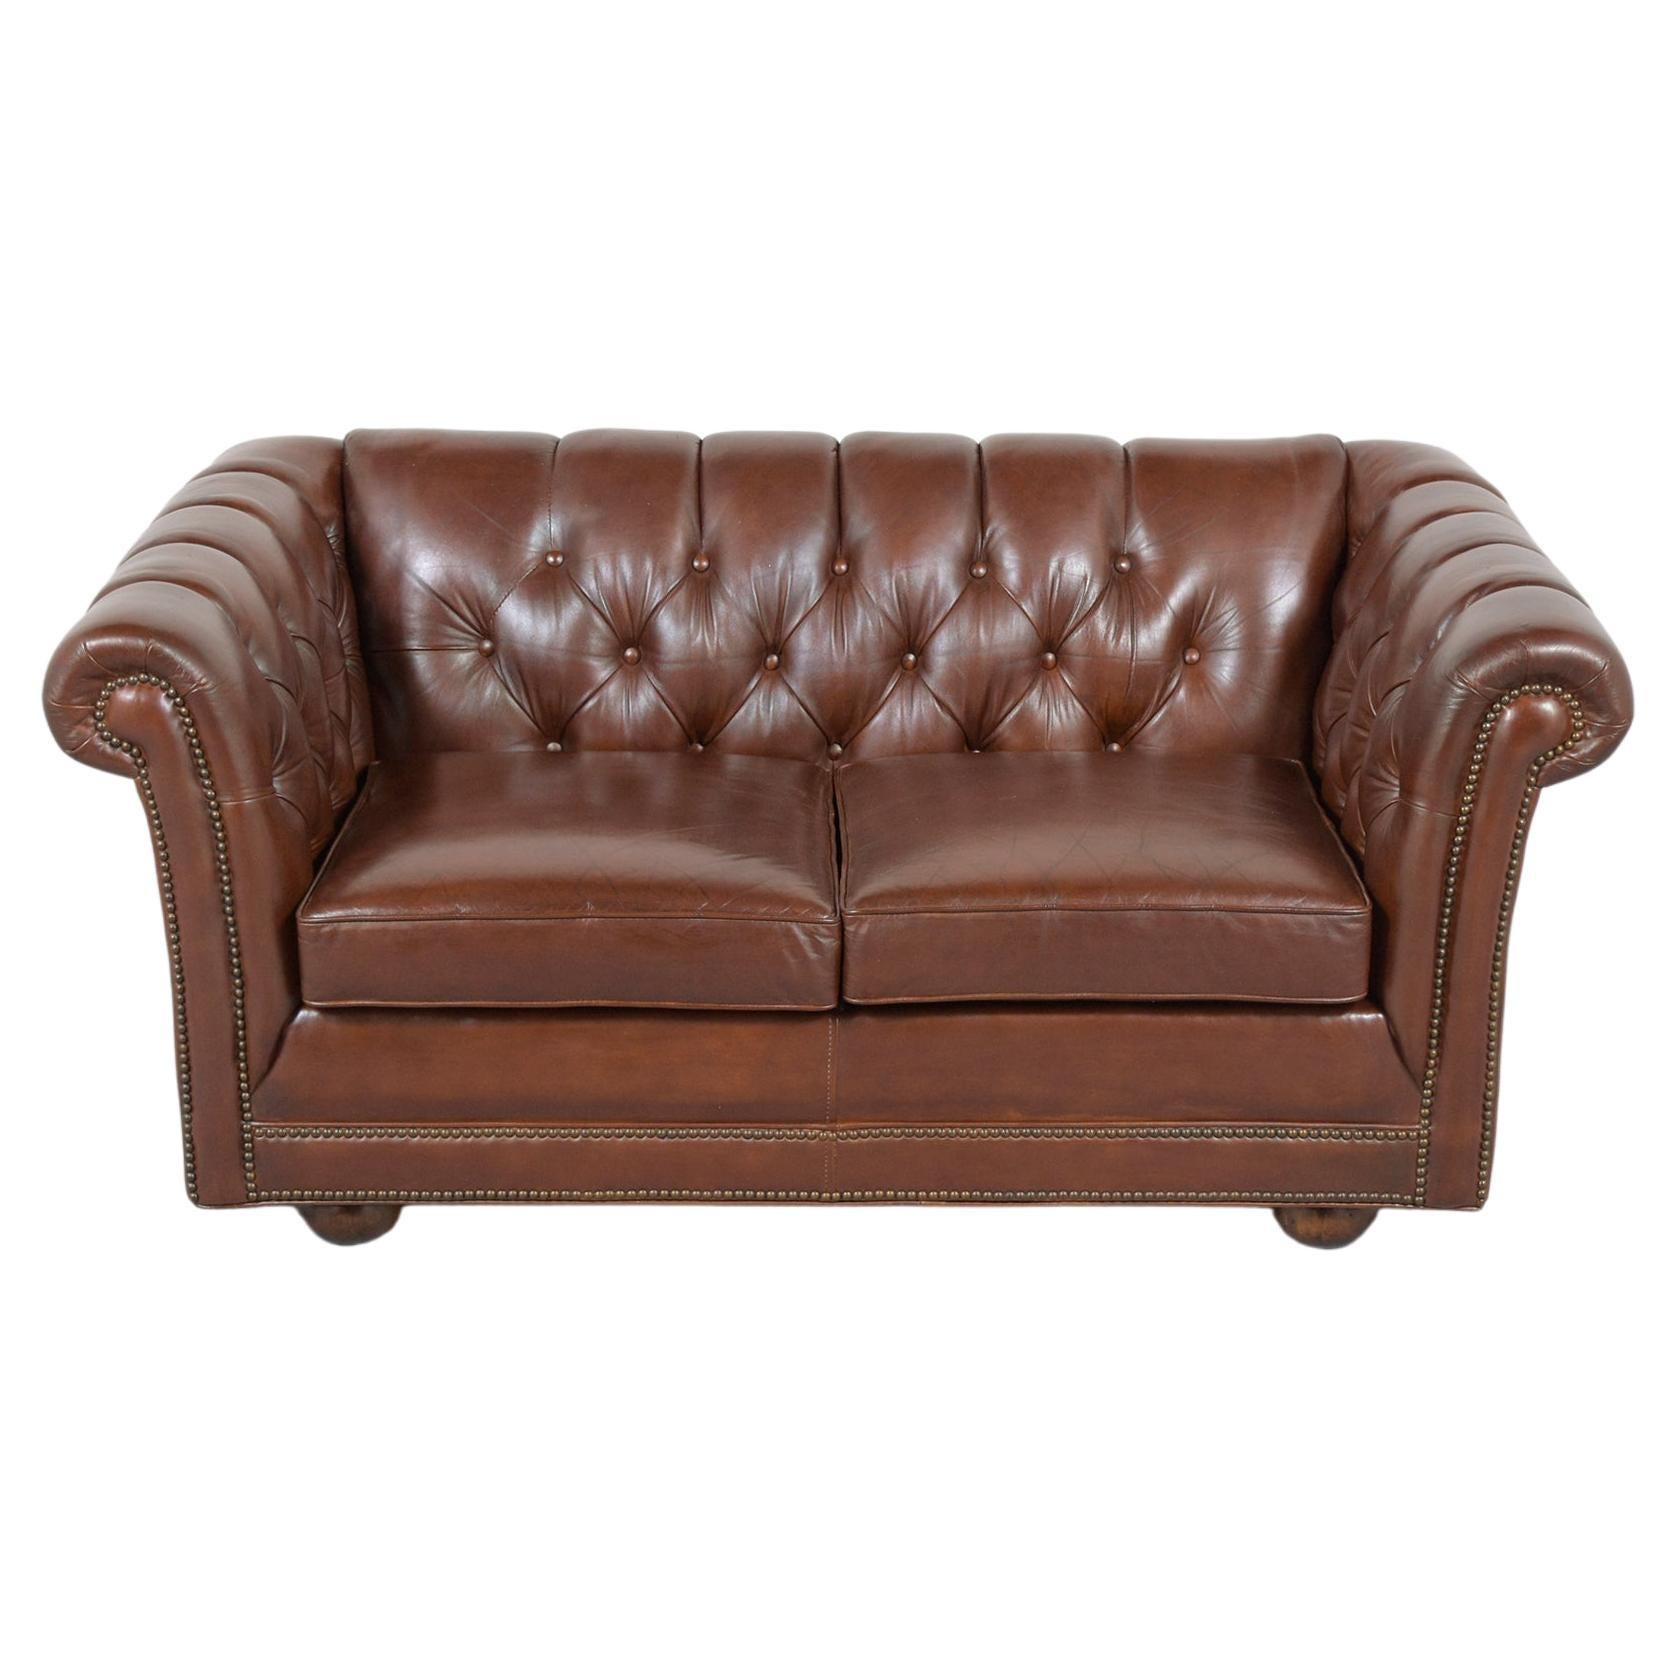 An extraordinary vintage brown leather chesterfield sofa is crafted out of wood and leather combination in great condition and completely restored by our professional craftsmen team. This sofa features the original leather upholstery newly dyed in